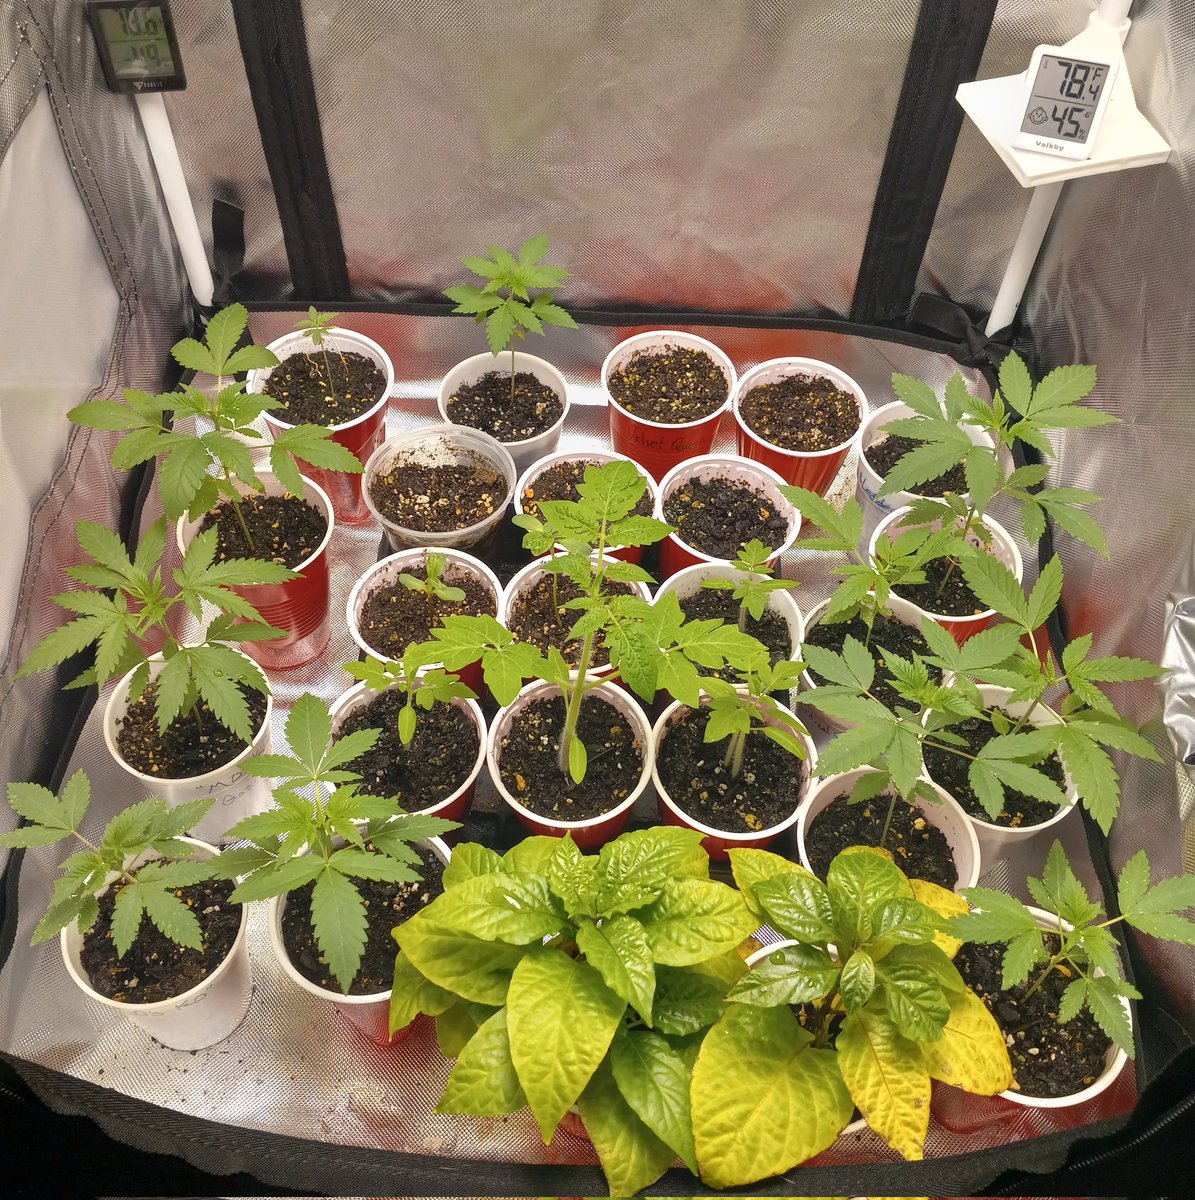 They will be ready for the garden in 2 weeks. We have 1 Dark Chocolate OG and 2 Cherry Stuffed Oreoz by @SocalSeedVault 2 MO's KO by @gasmanthegascan 2 Peanut Butter Sunset and 2 Chuttes and Ladders by @TheGreatFish4 2 Critical Citrus by @terpfrenzy and Roma and sunflowers.